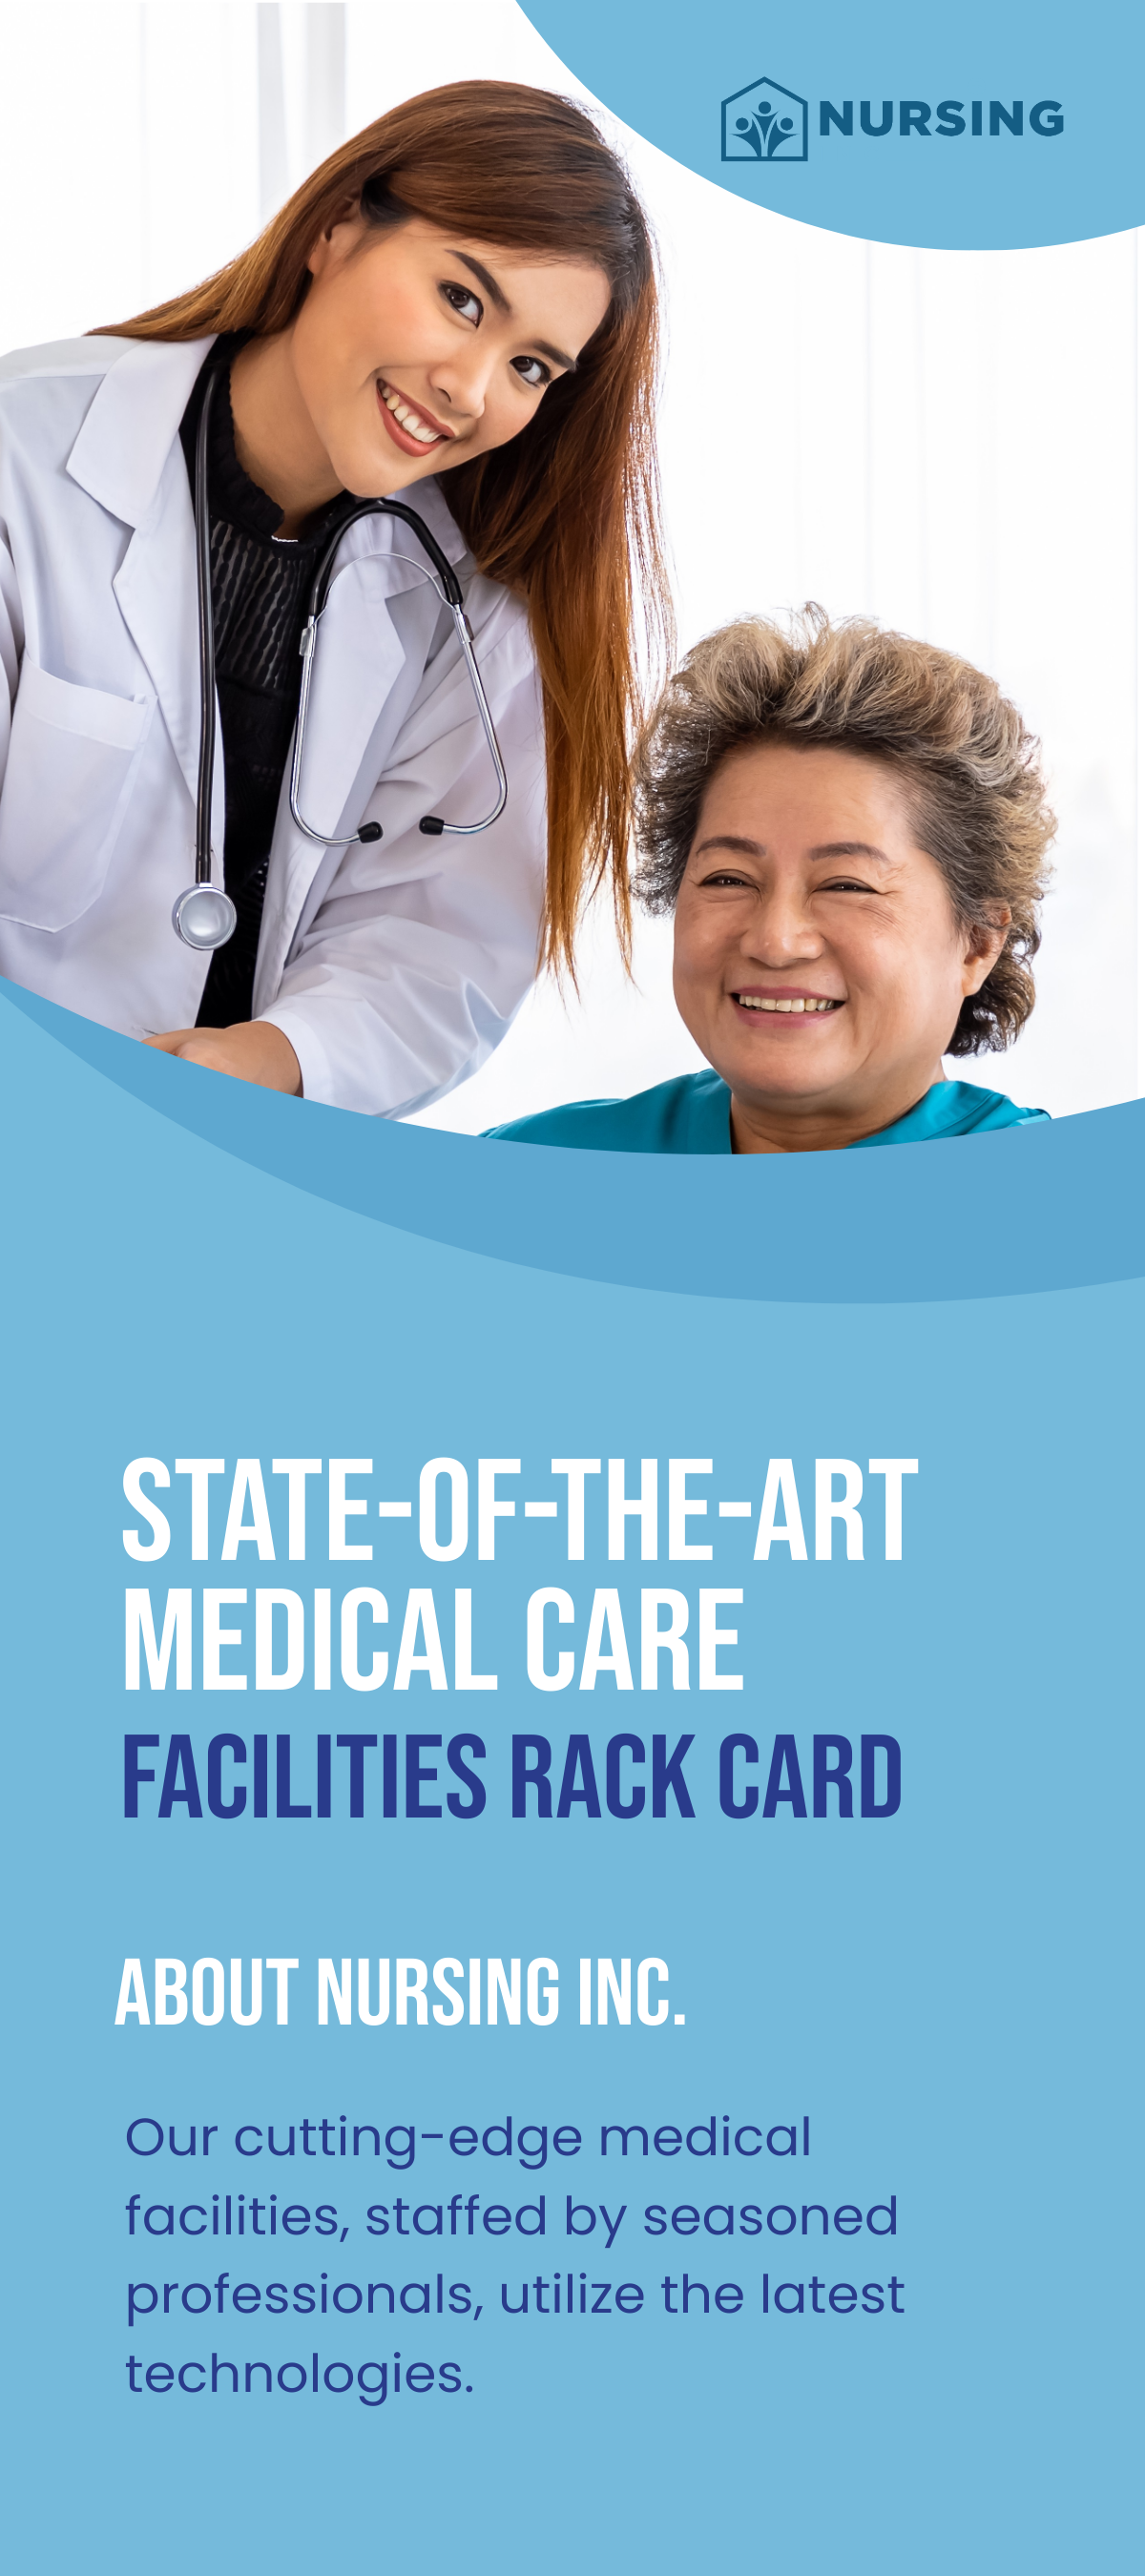 State-of-the-Art Medical Care Facilities Rack Card